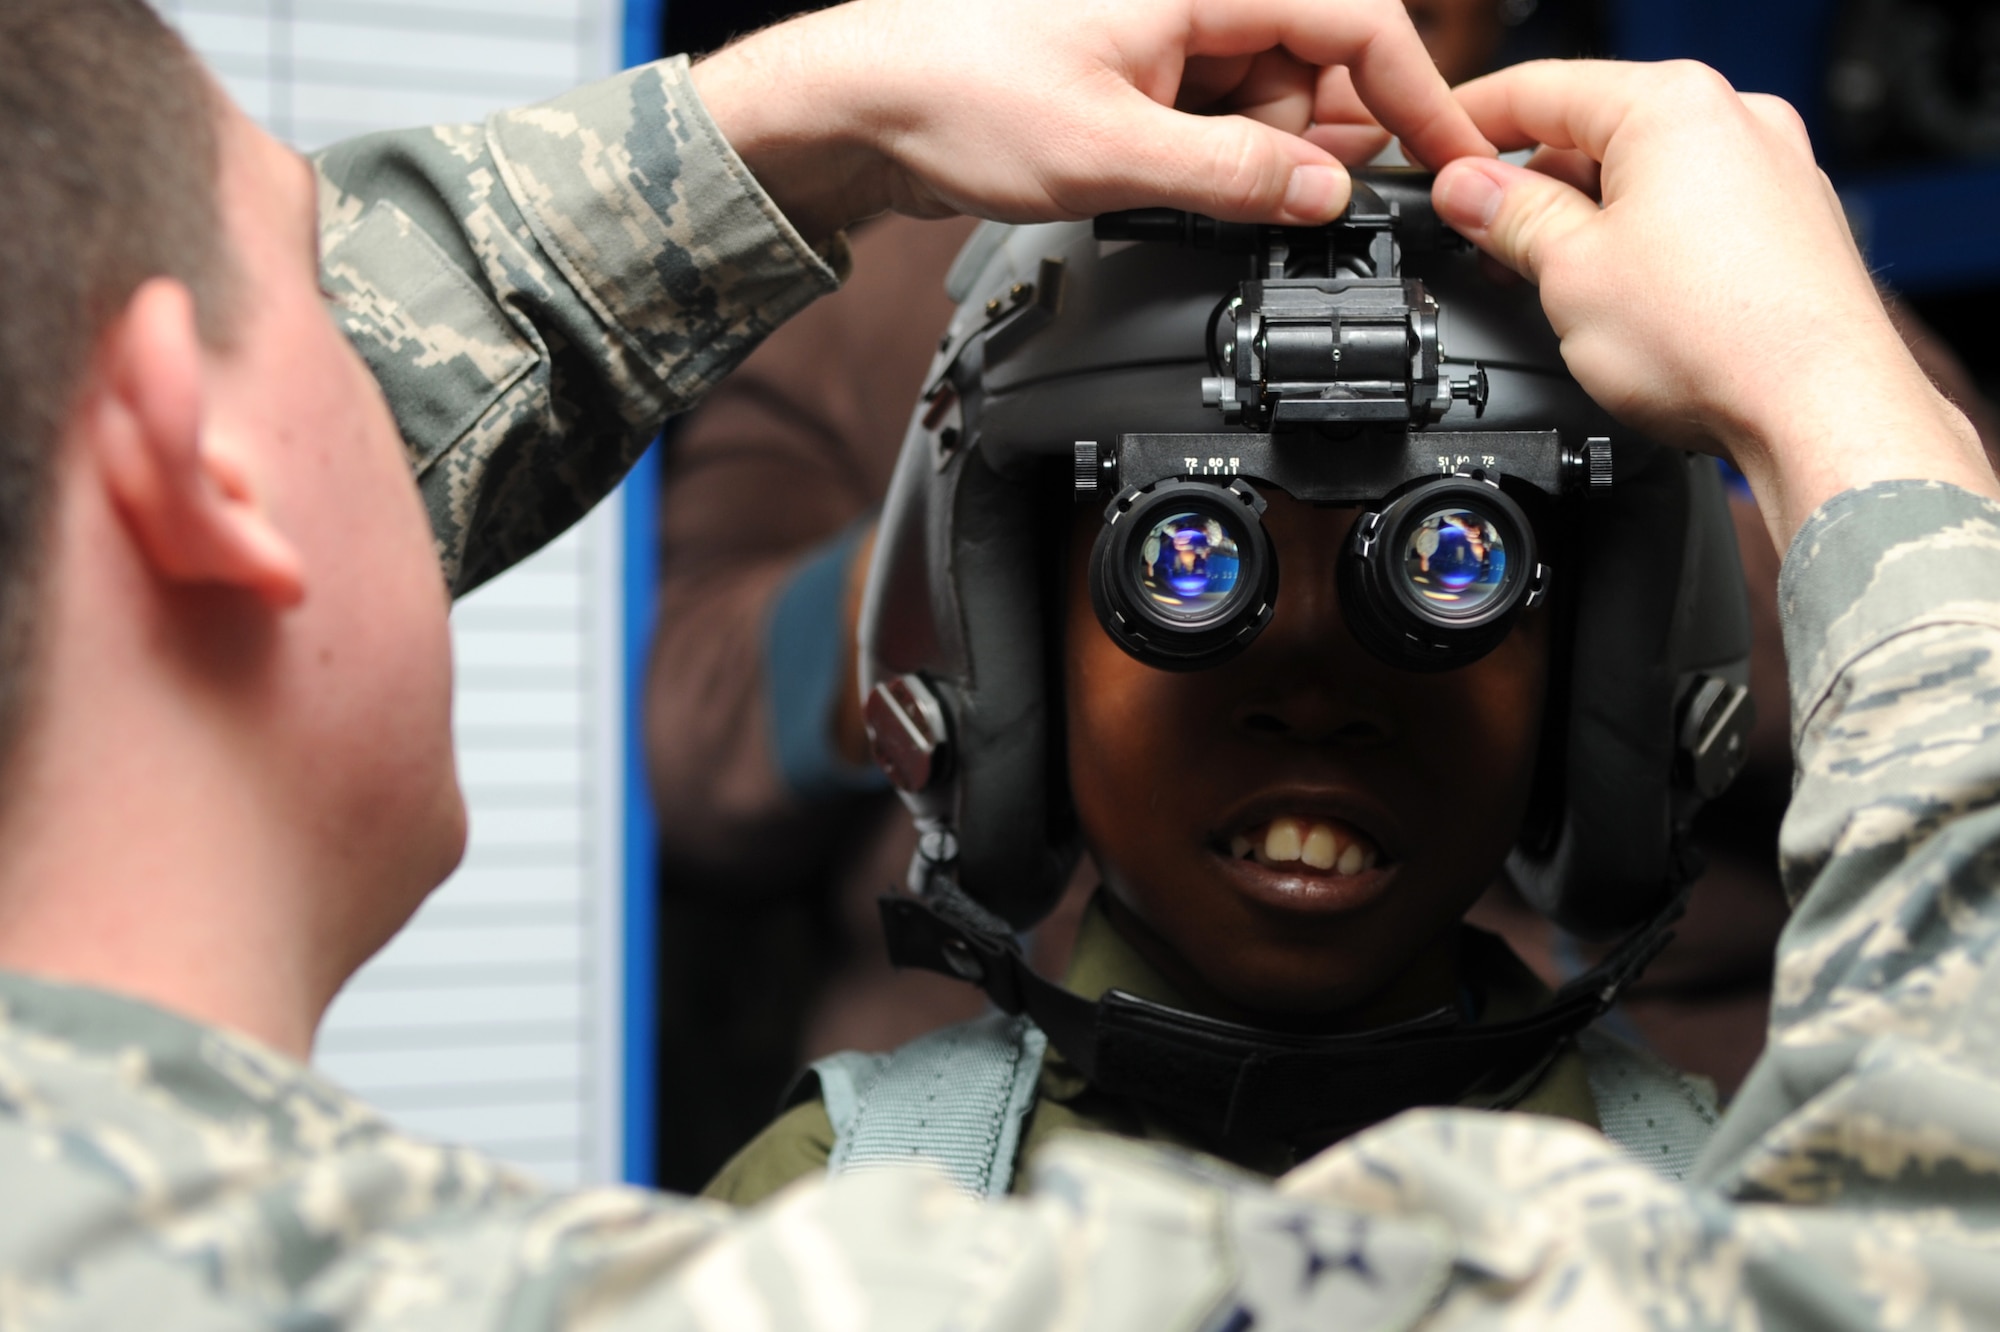 Airman 1st Class Luke Locken, a 4th Operations Support Squadron aircrew flight equipment technician, adjusts night vision goggles on Jeremiah Seaberry, the 334th Fighter Squadron pilot for a day, during a 4th Fighter Wing Pilot for a Day event, April 3, 2015, at Seymour Johnson Air Force Base, N.C. Jeremiah was never expected to live past his first birthday, but has celebrated nine. (U.S. Air Force photo/Senior Airman Ashley J. Thum)